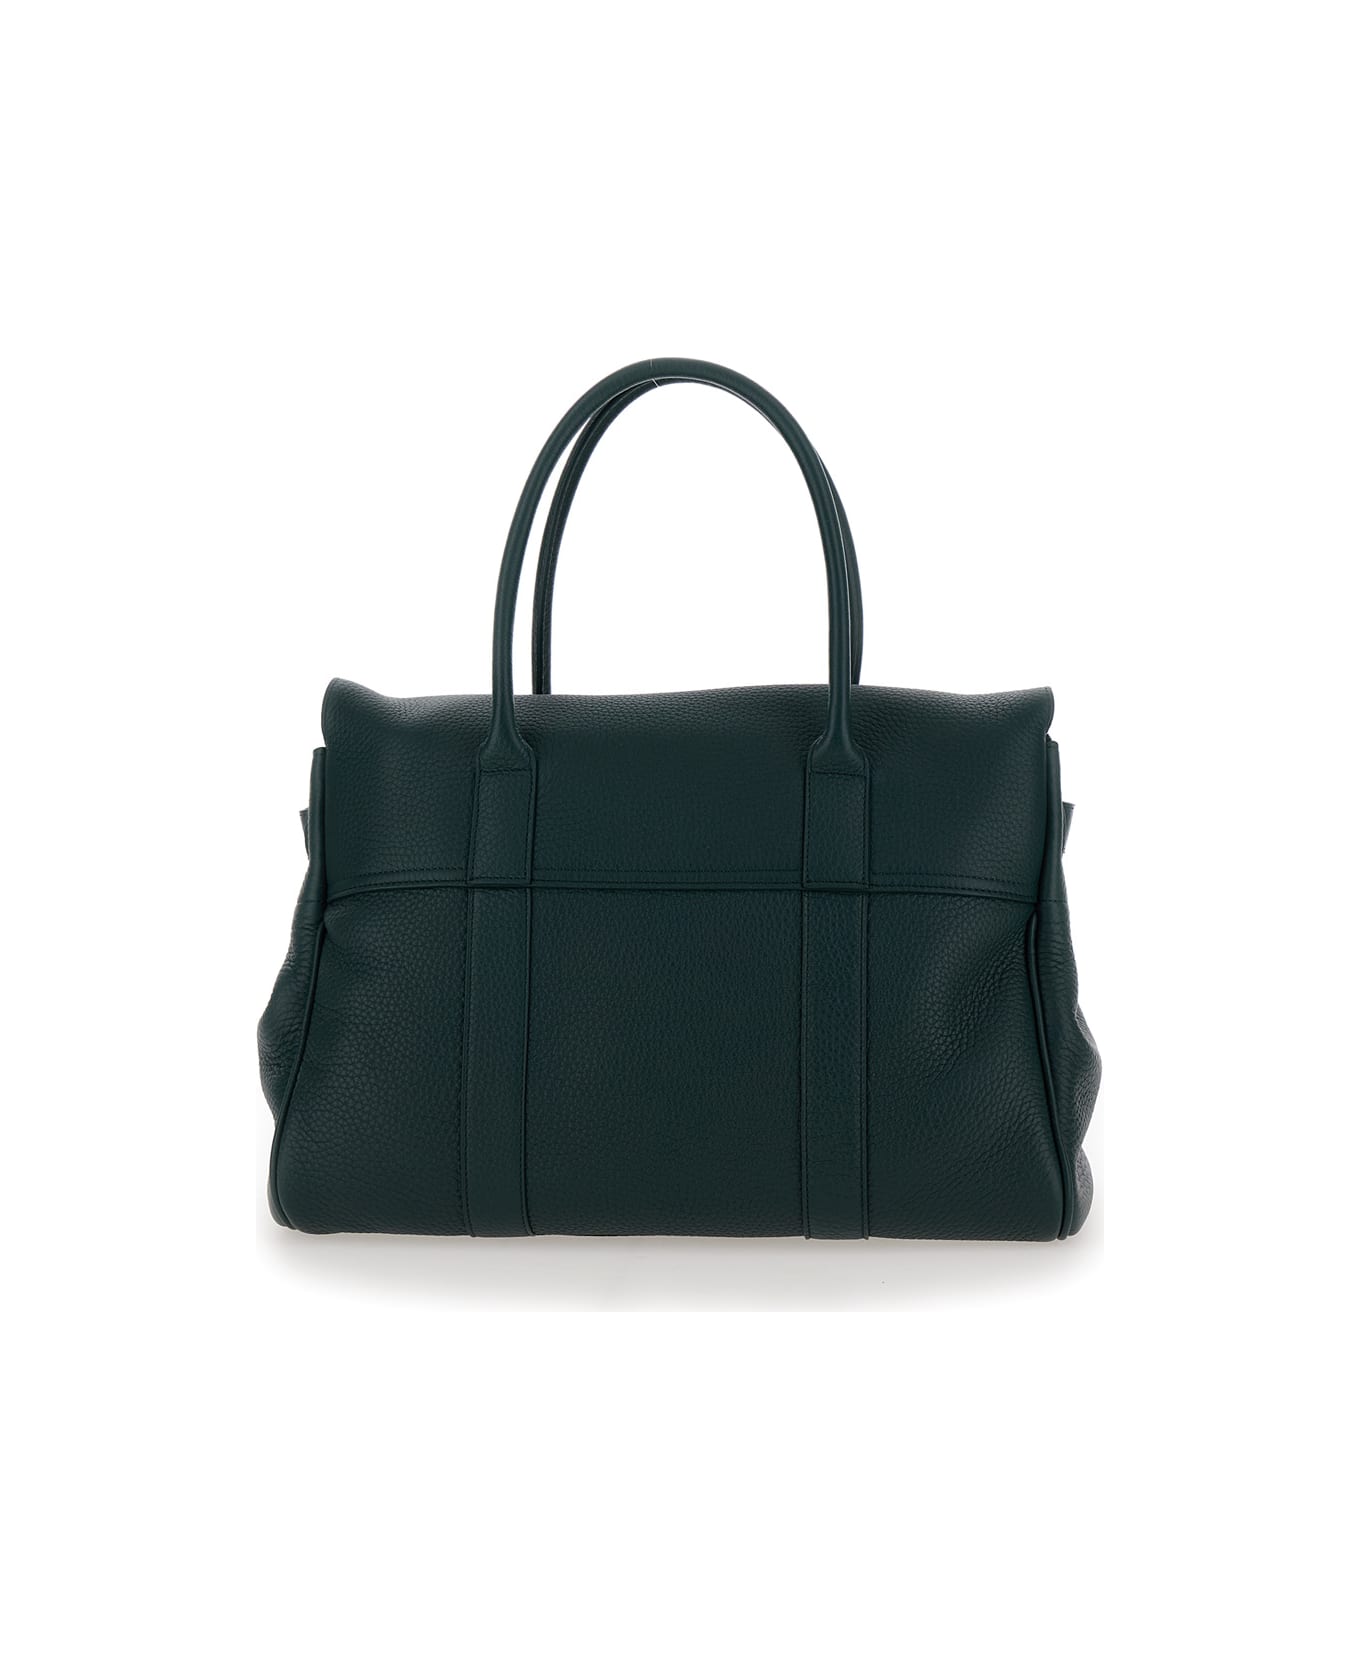 Mulberry 'bayswater' Green Handbag With Postman's Lock In Hammered Leather Woman - Green トートバッグ